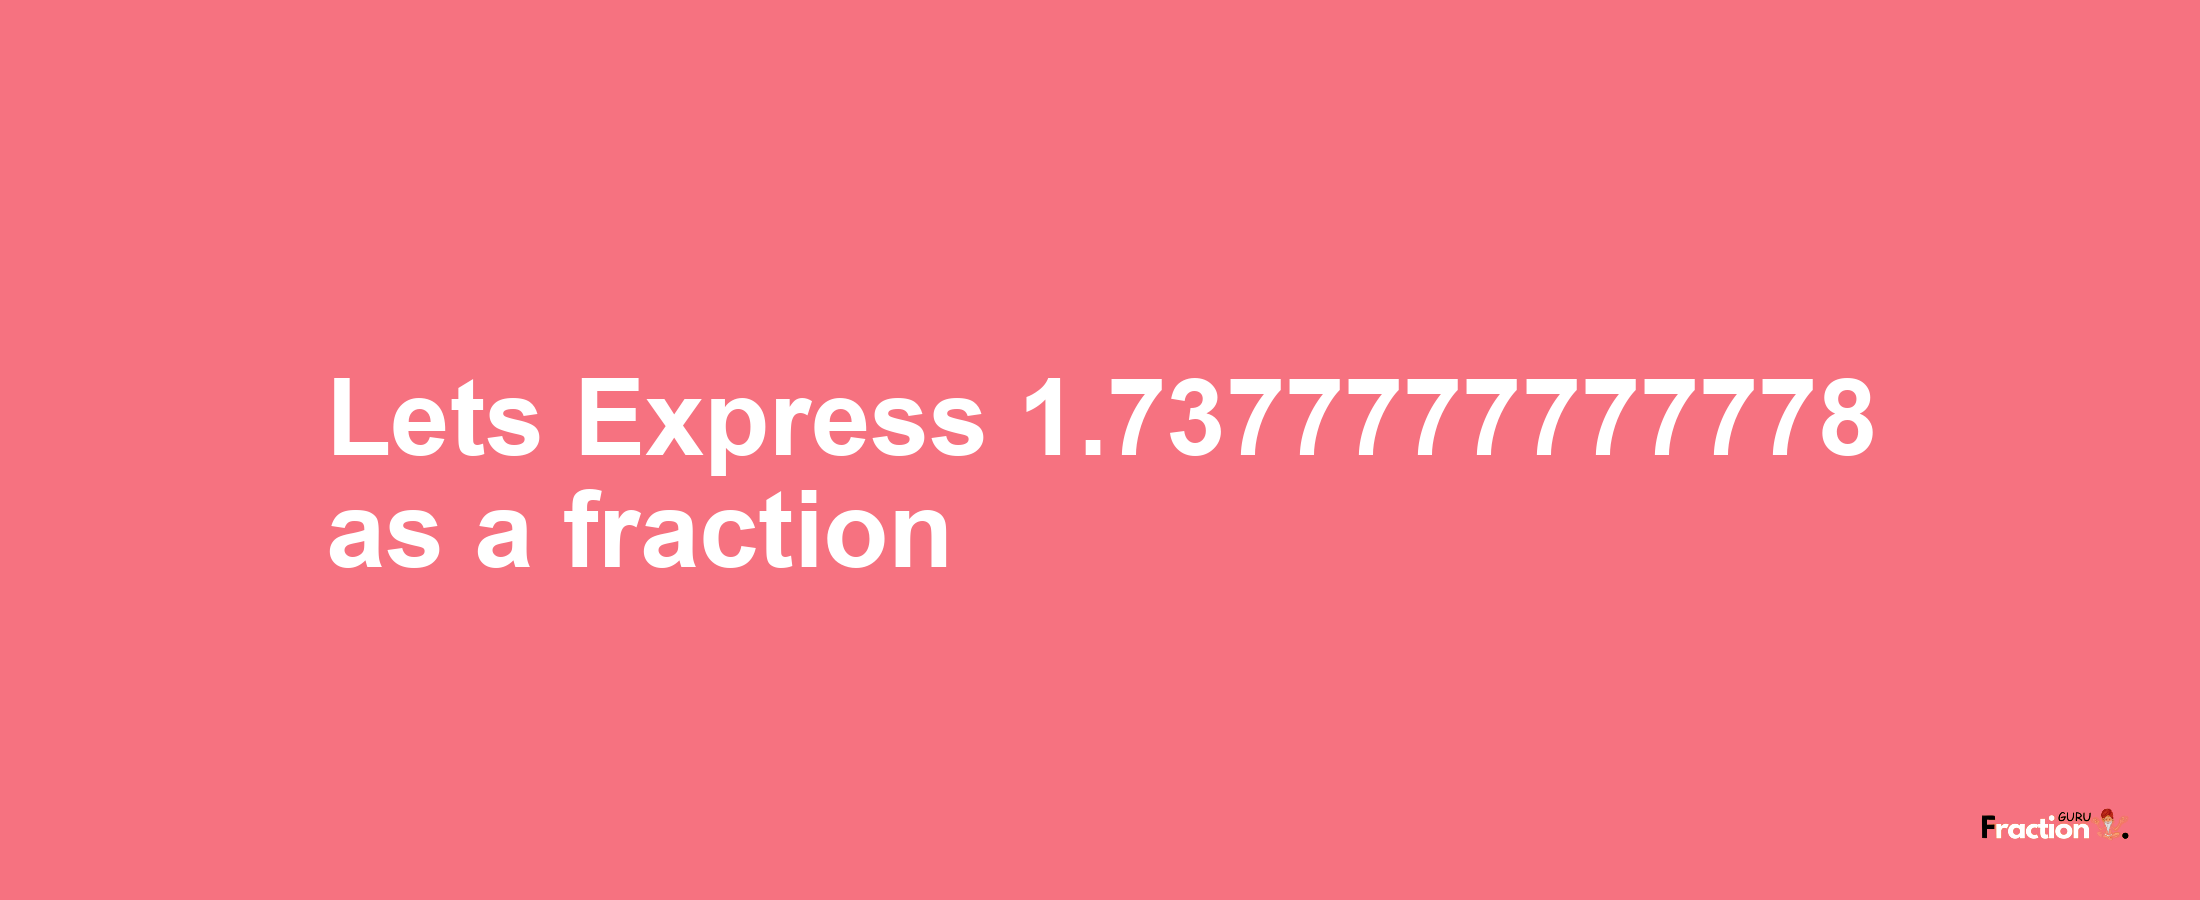 Lets Express 1.7377777777778 as afraction